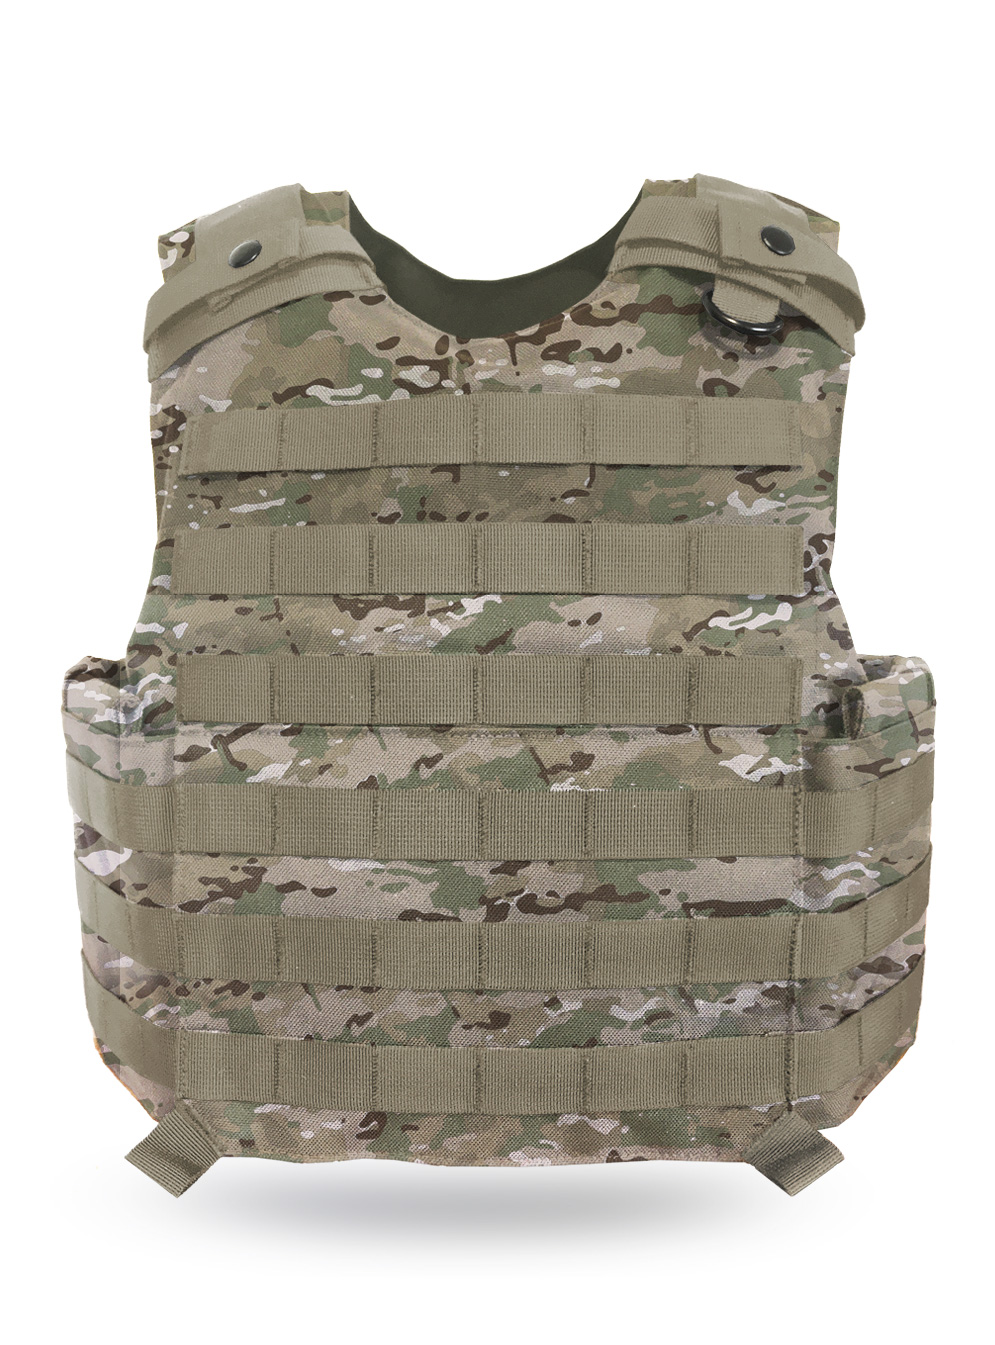 vestguard hard body armour plate shield tactical rifle bullet stab